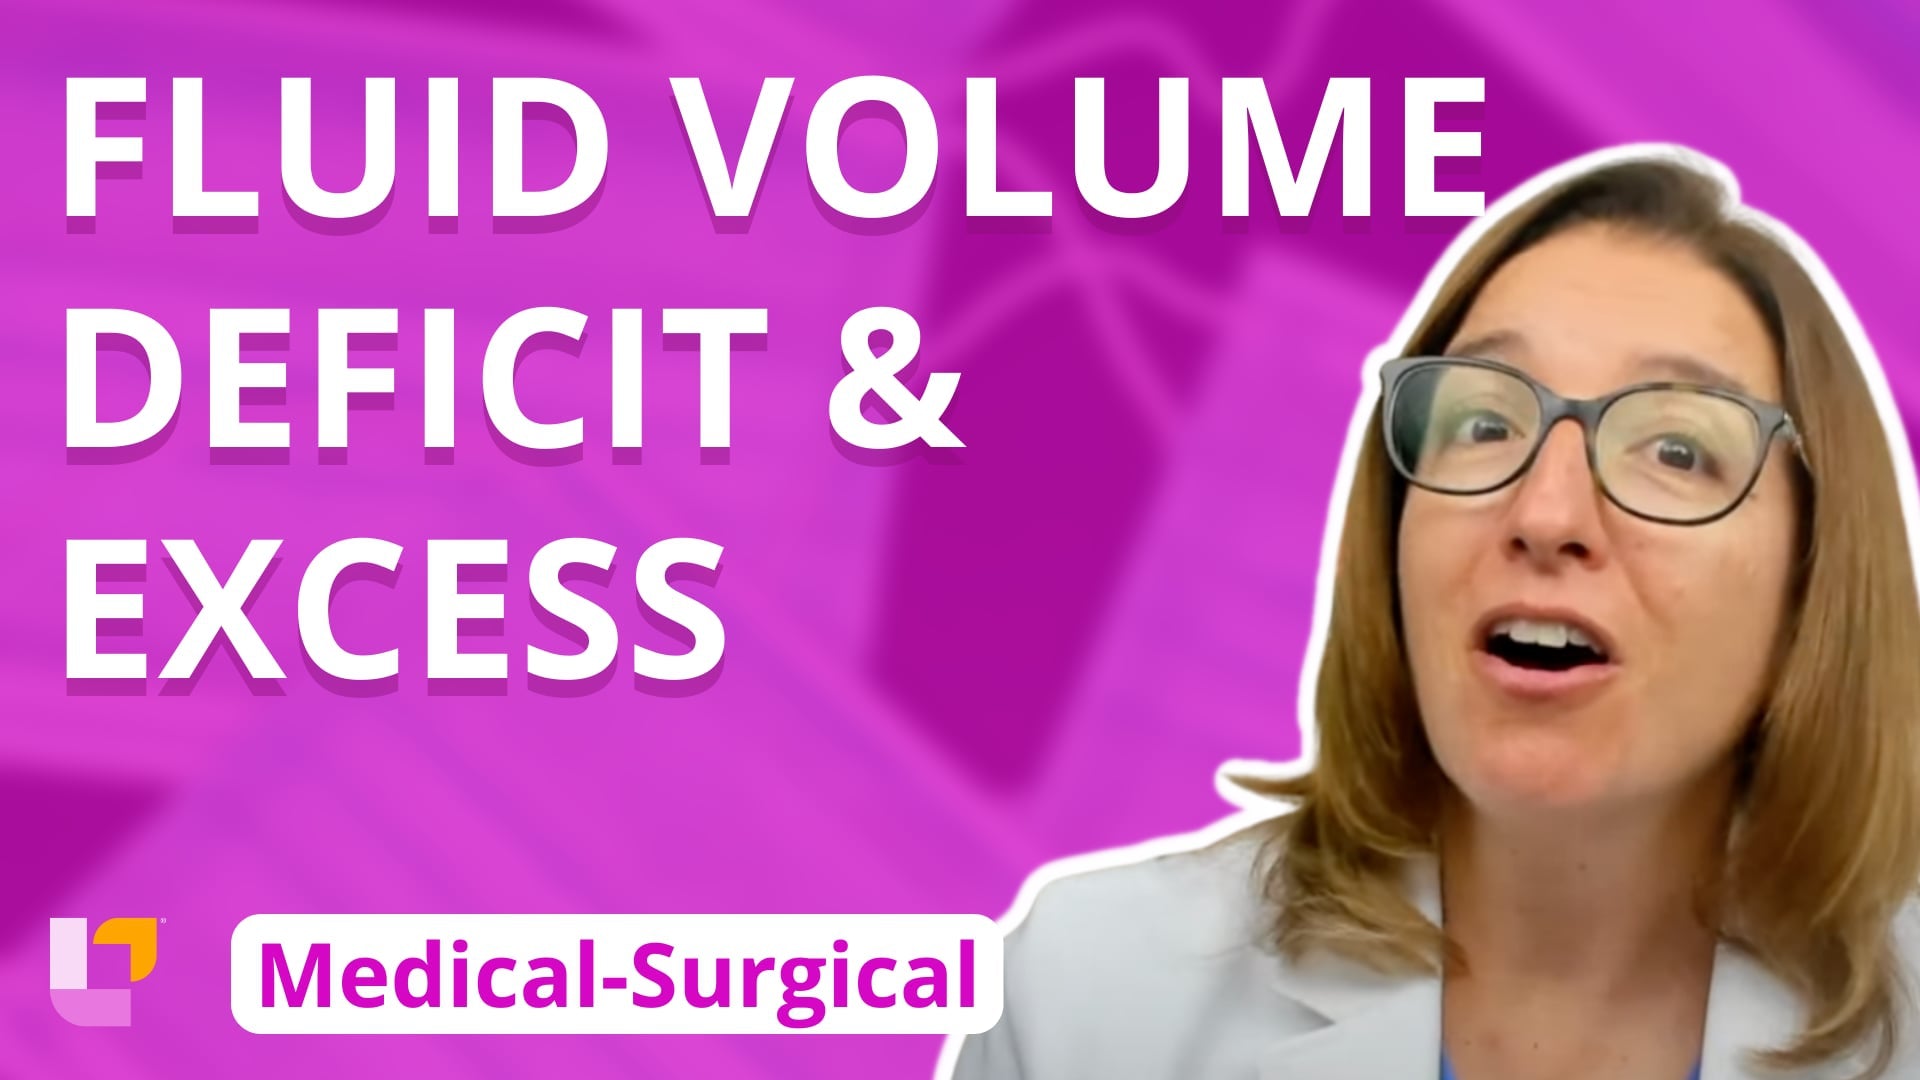 Med-Surg - Cardiovascular System, part 22: Fluid Volume Deficit and Excess - LevelUpRN